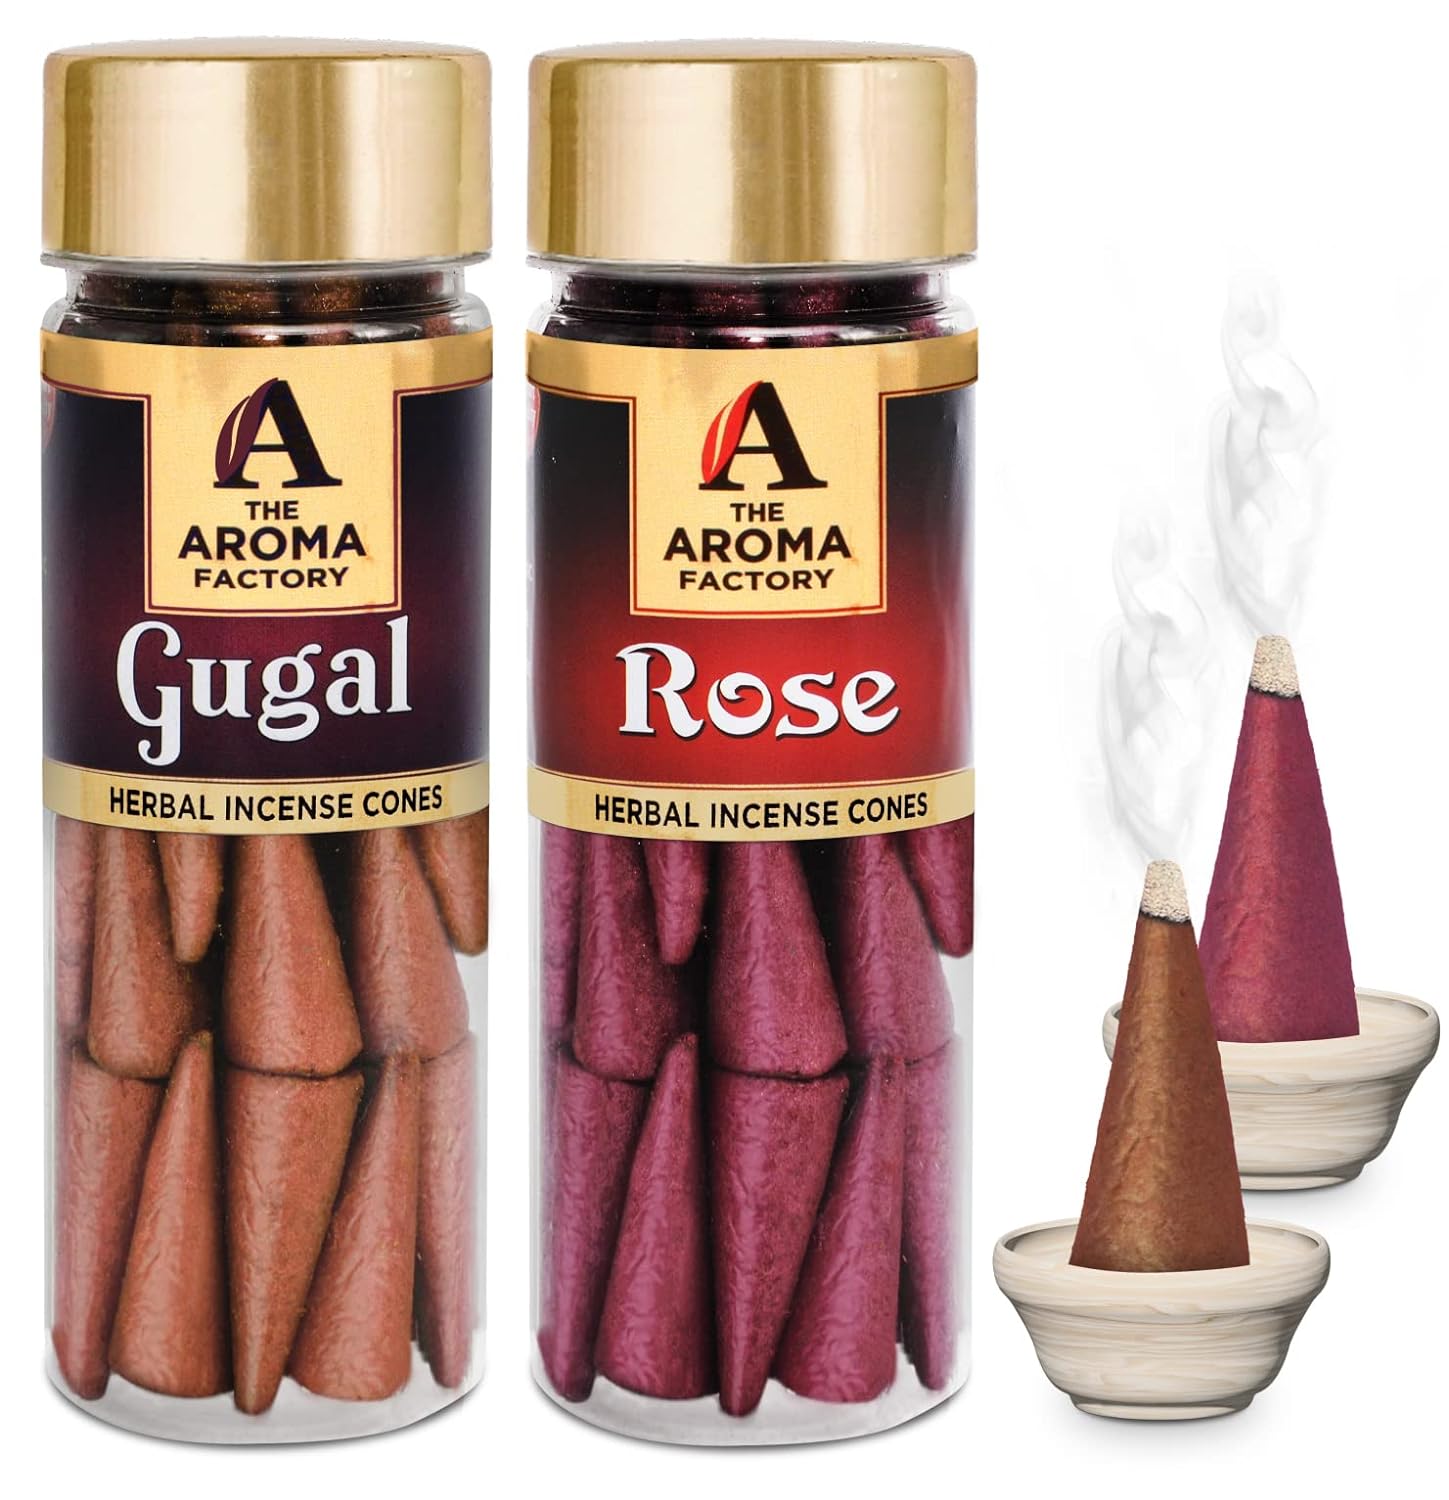 The Aroma Factory Incense Dhoop Cone for Puja, Gugal & Rose (100% Herbal & 0% Charcoal) 2 Bottles x 30 Cones